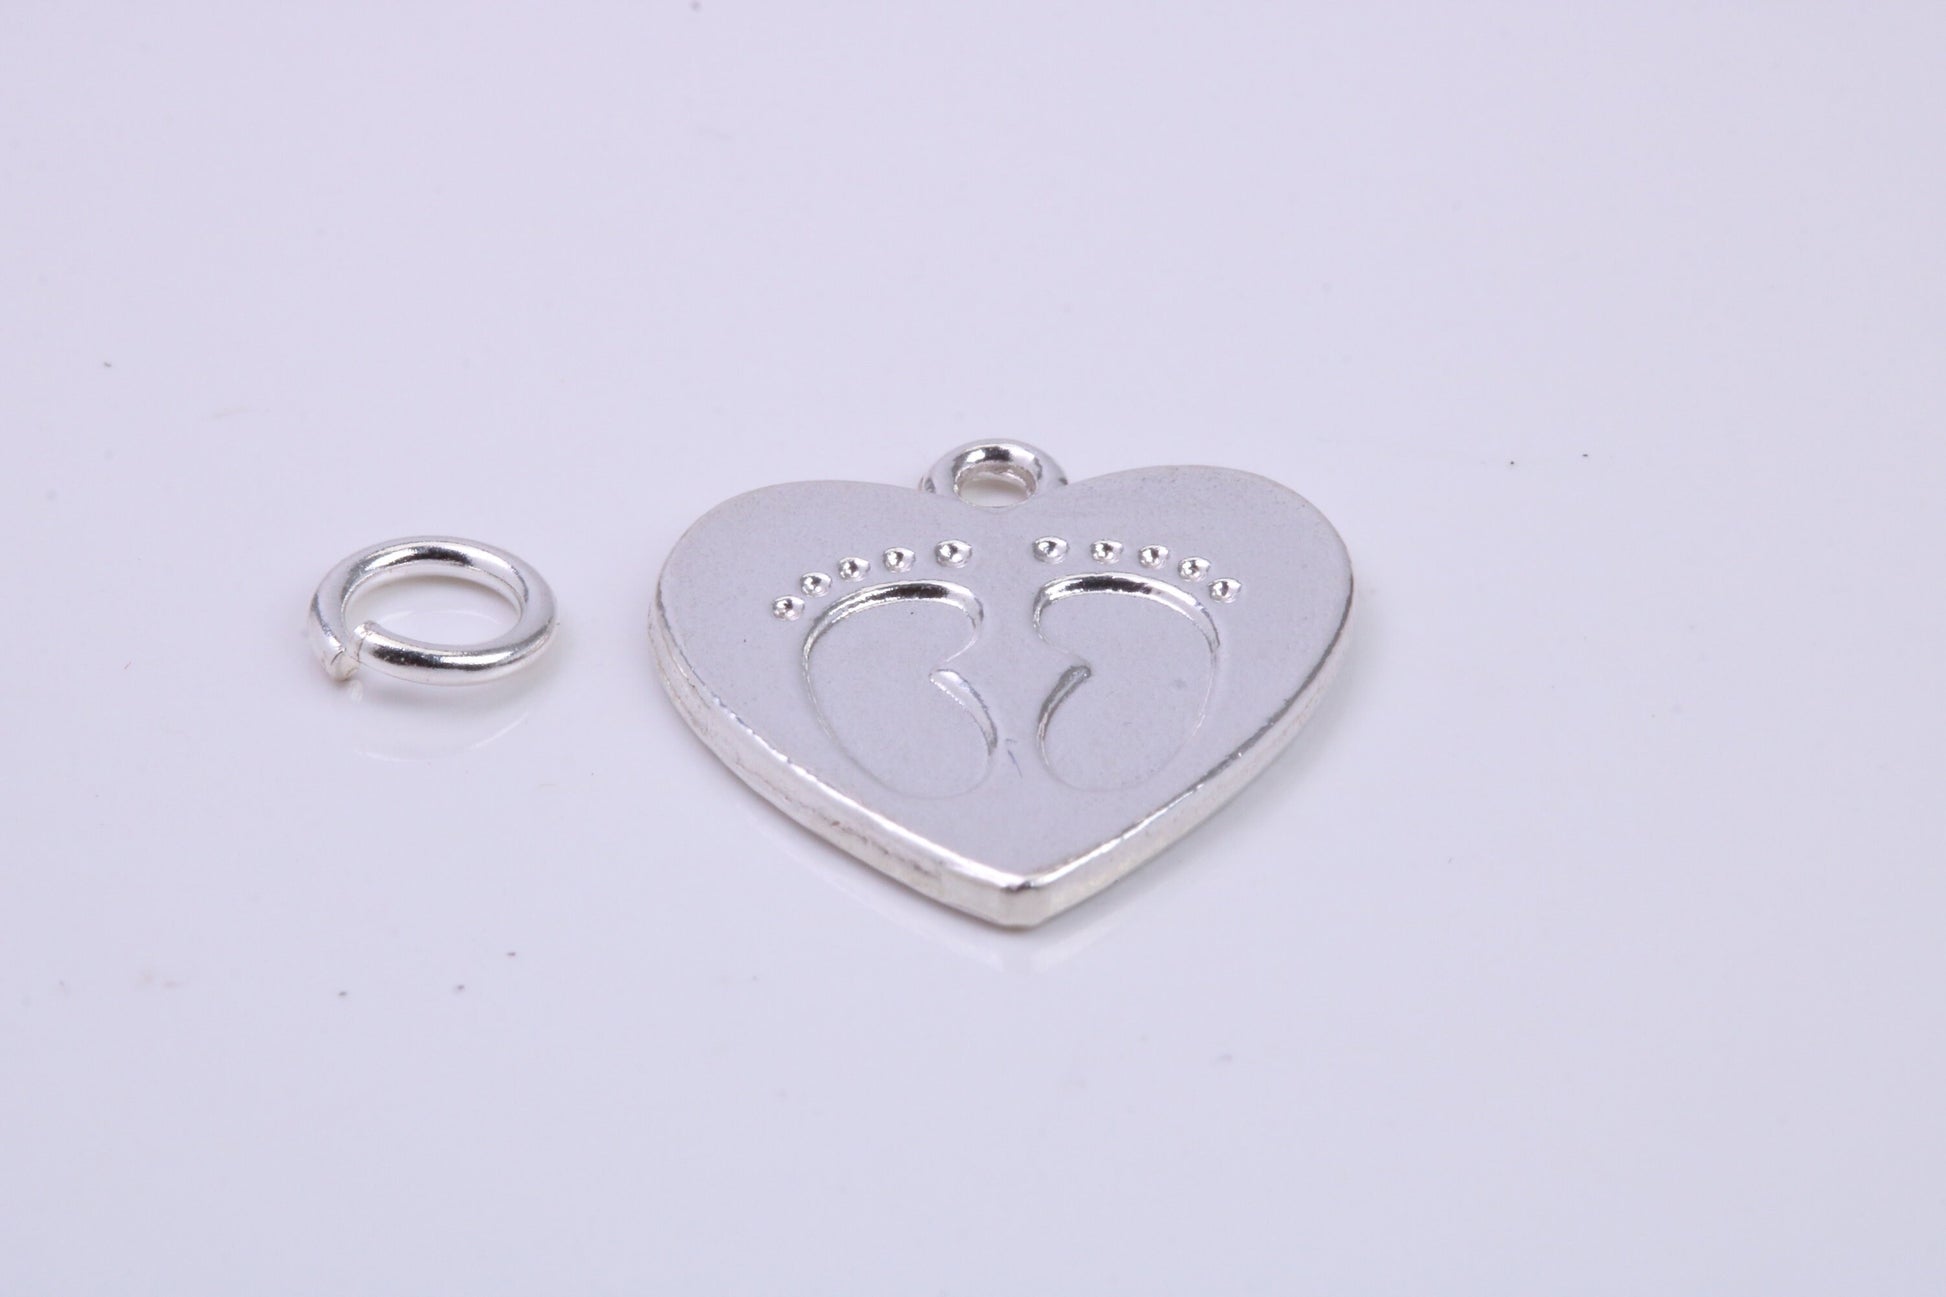 Foot Prints Charm, Traditional Charm, Made from Solid 925 Grade Sterling Silver, Complete with Attachment Link